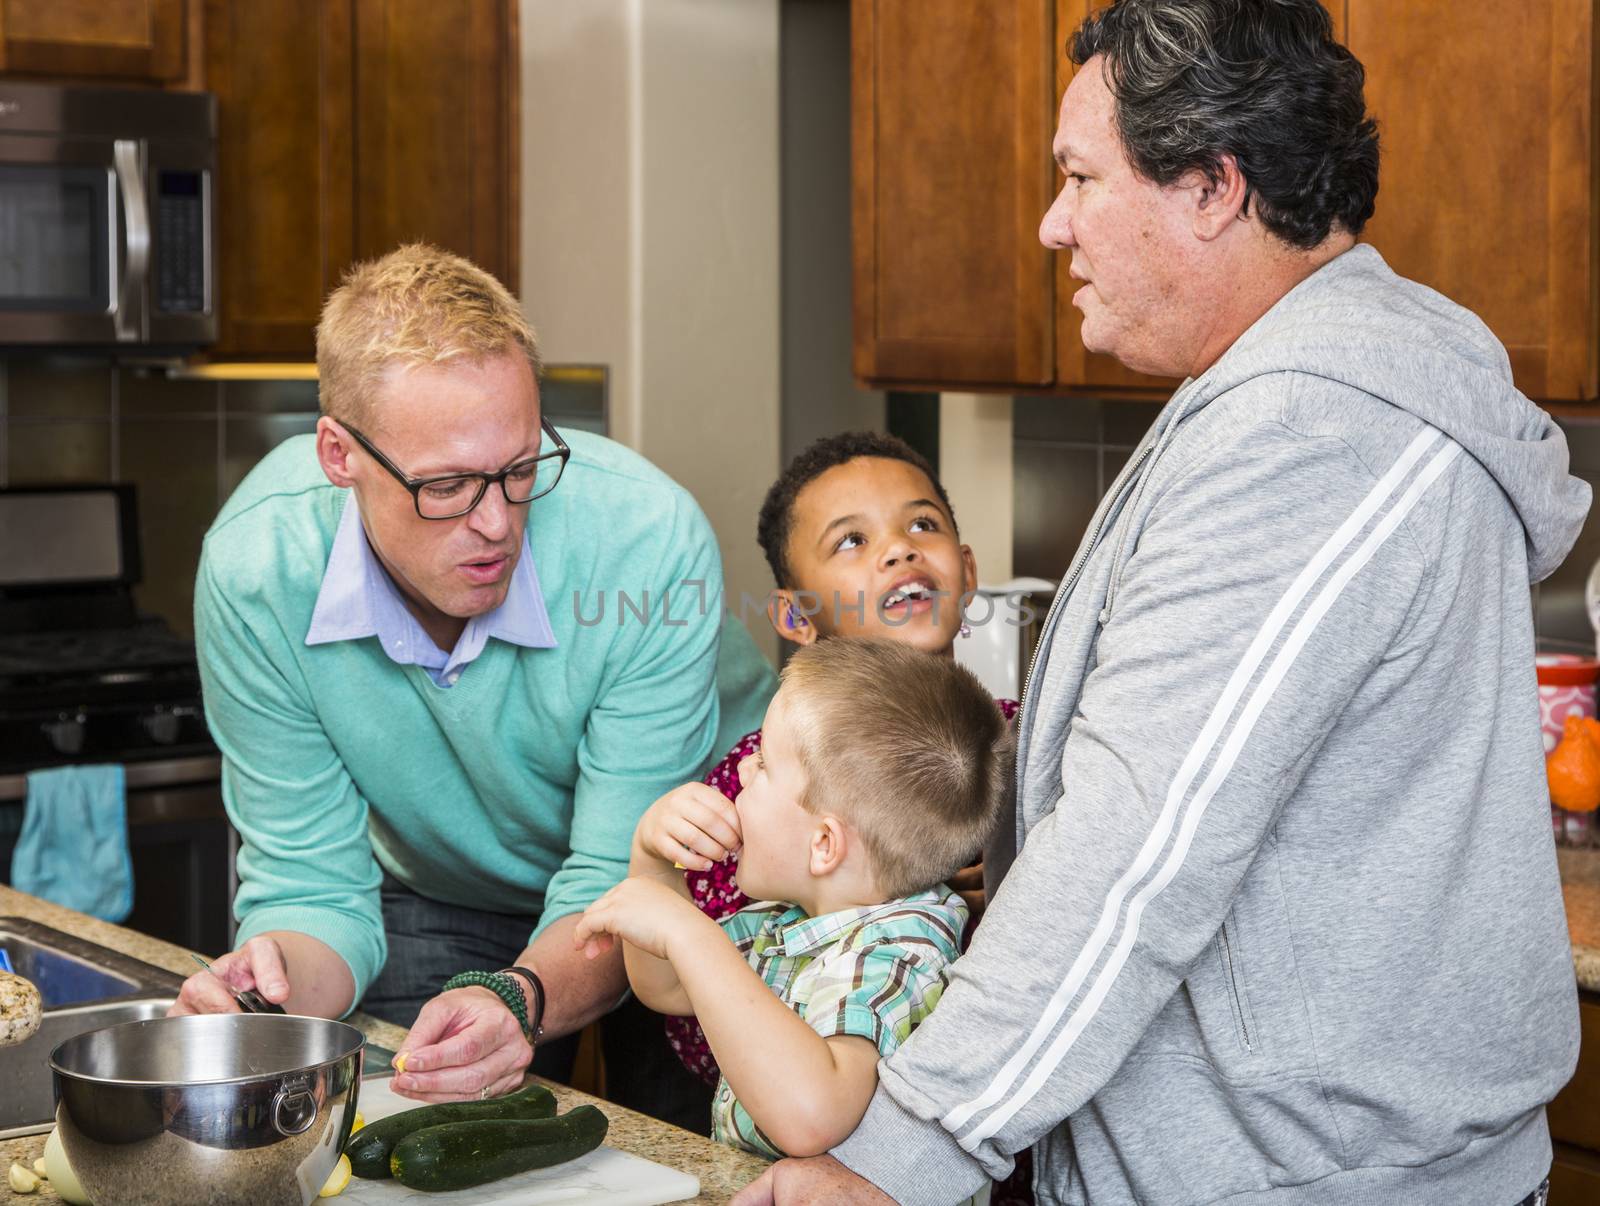 Preparing a meal with gay couple and kids in their home kitchen